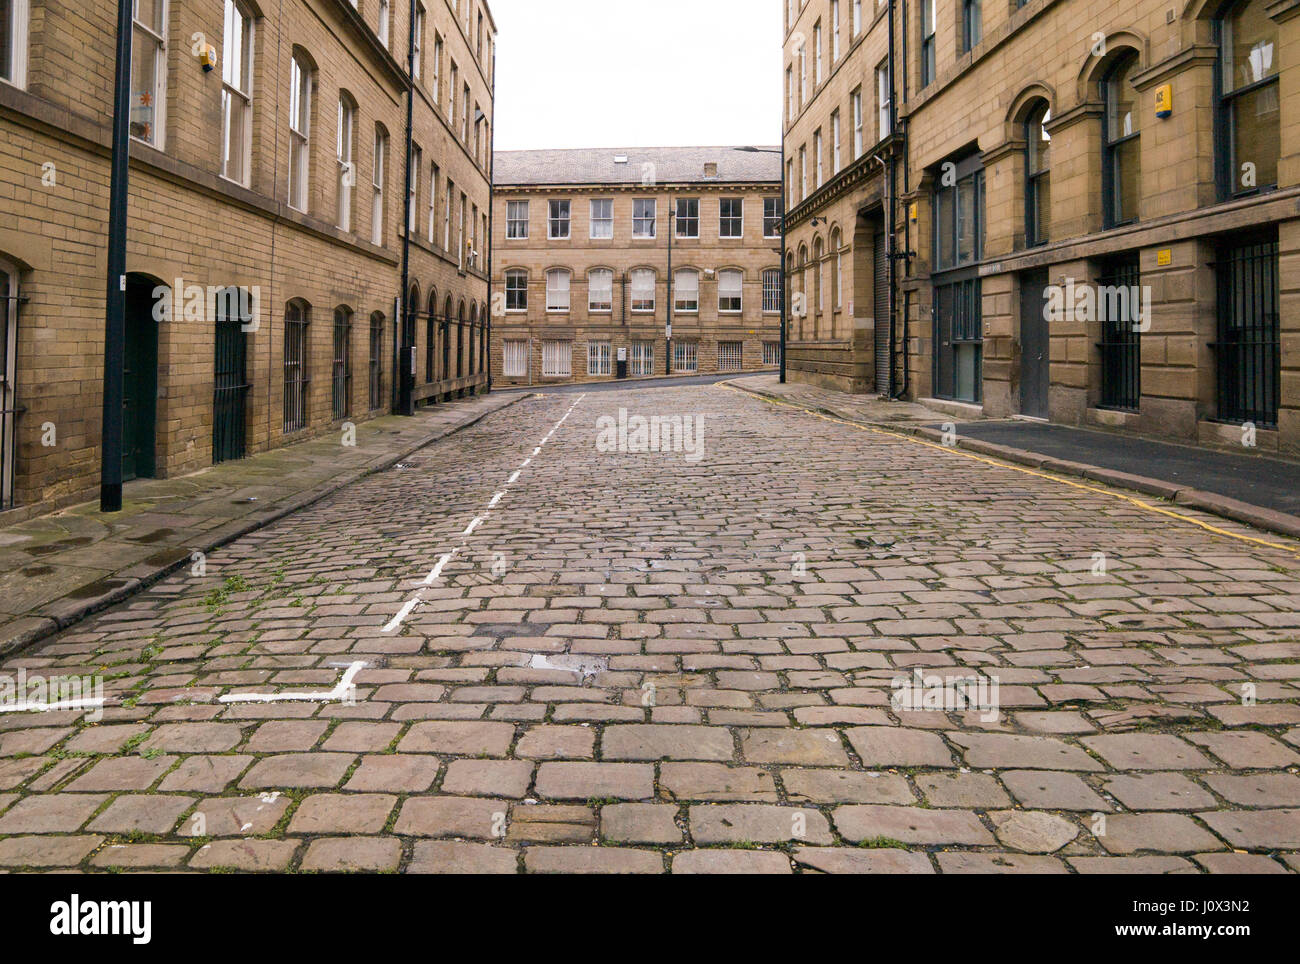 Bradford, England, the Little Germany area of warehouses and imposing building created by Jewish merchants many from Germany in the 19th century Stock Photo